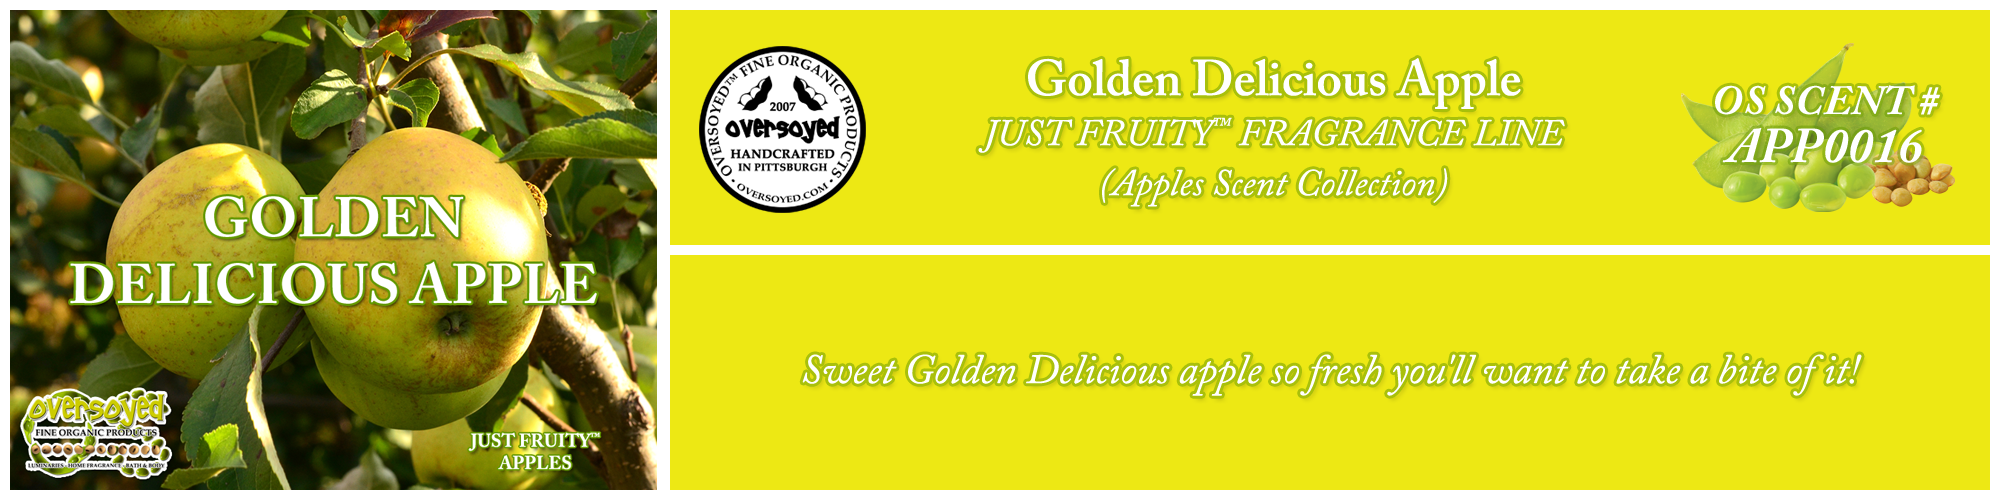 Golden Delicious Apple Handcrafted Products Collection